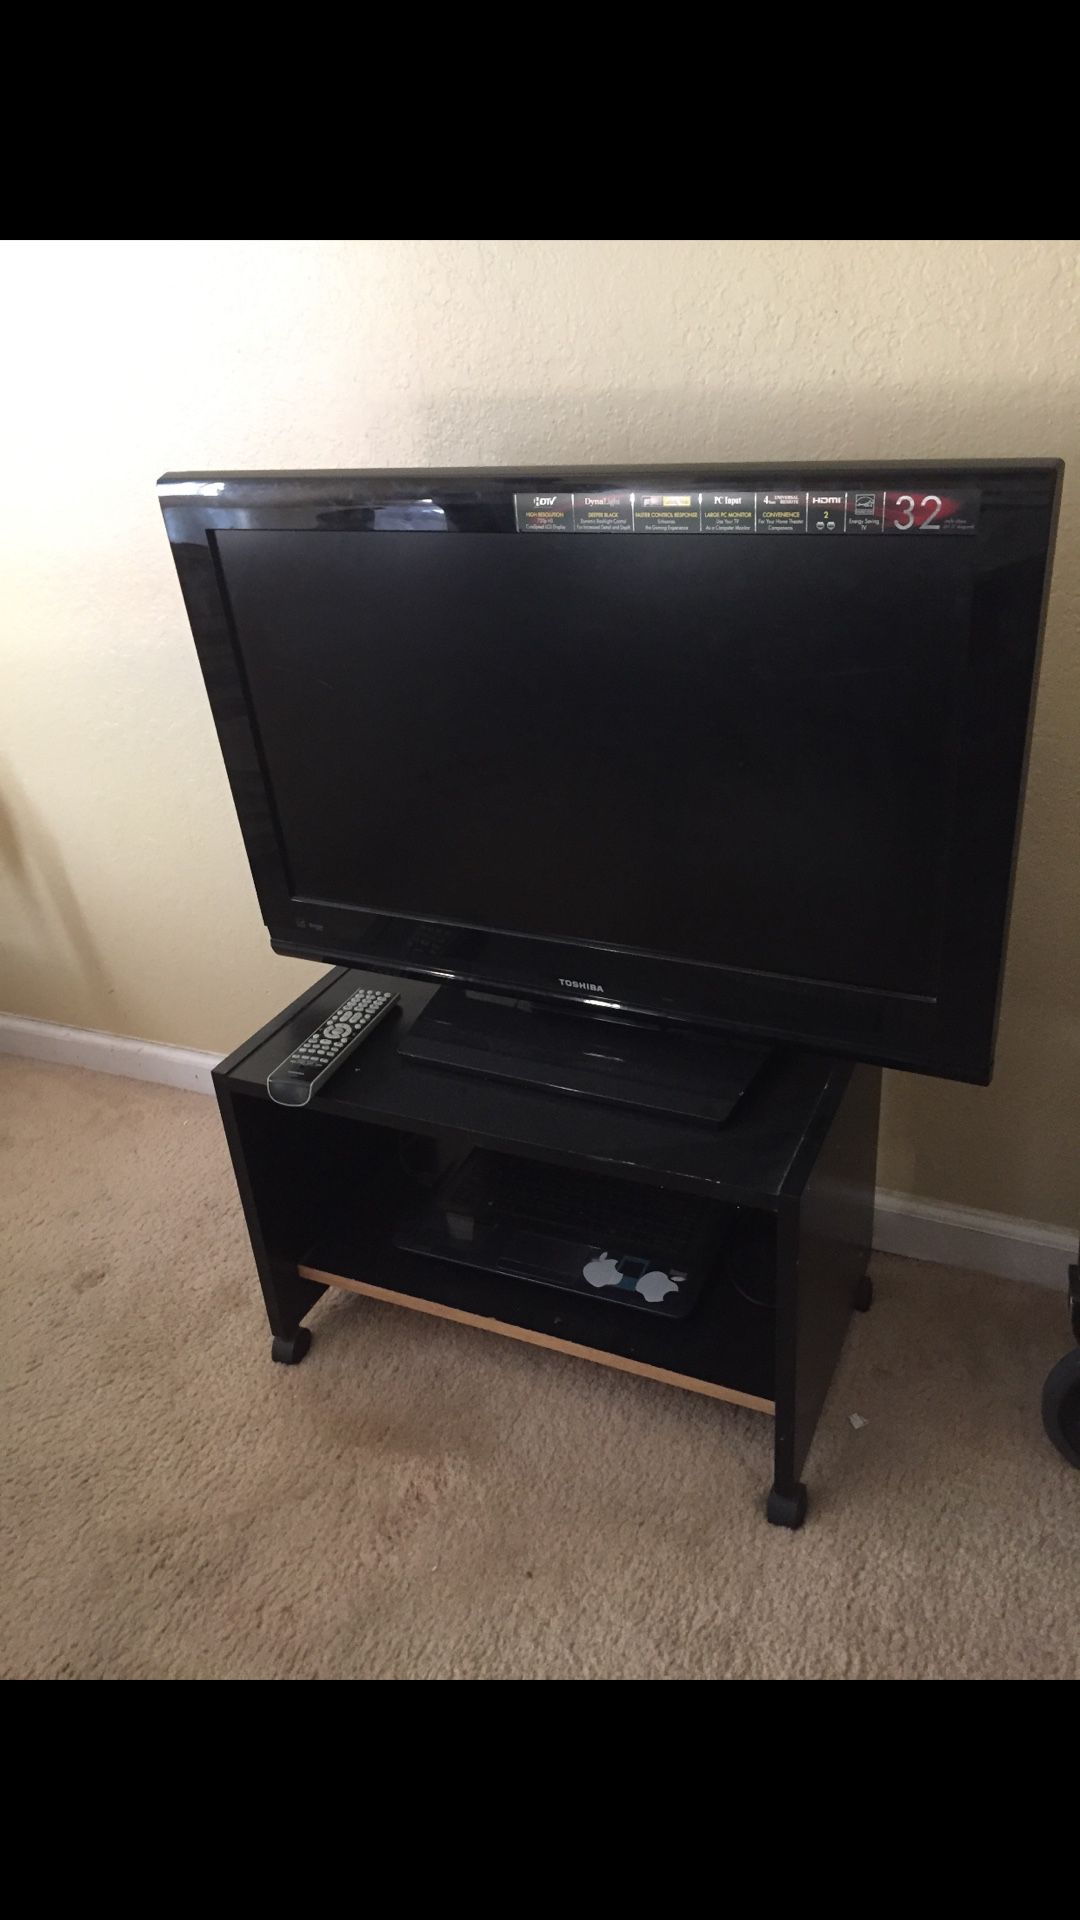 TV with stand